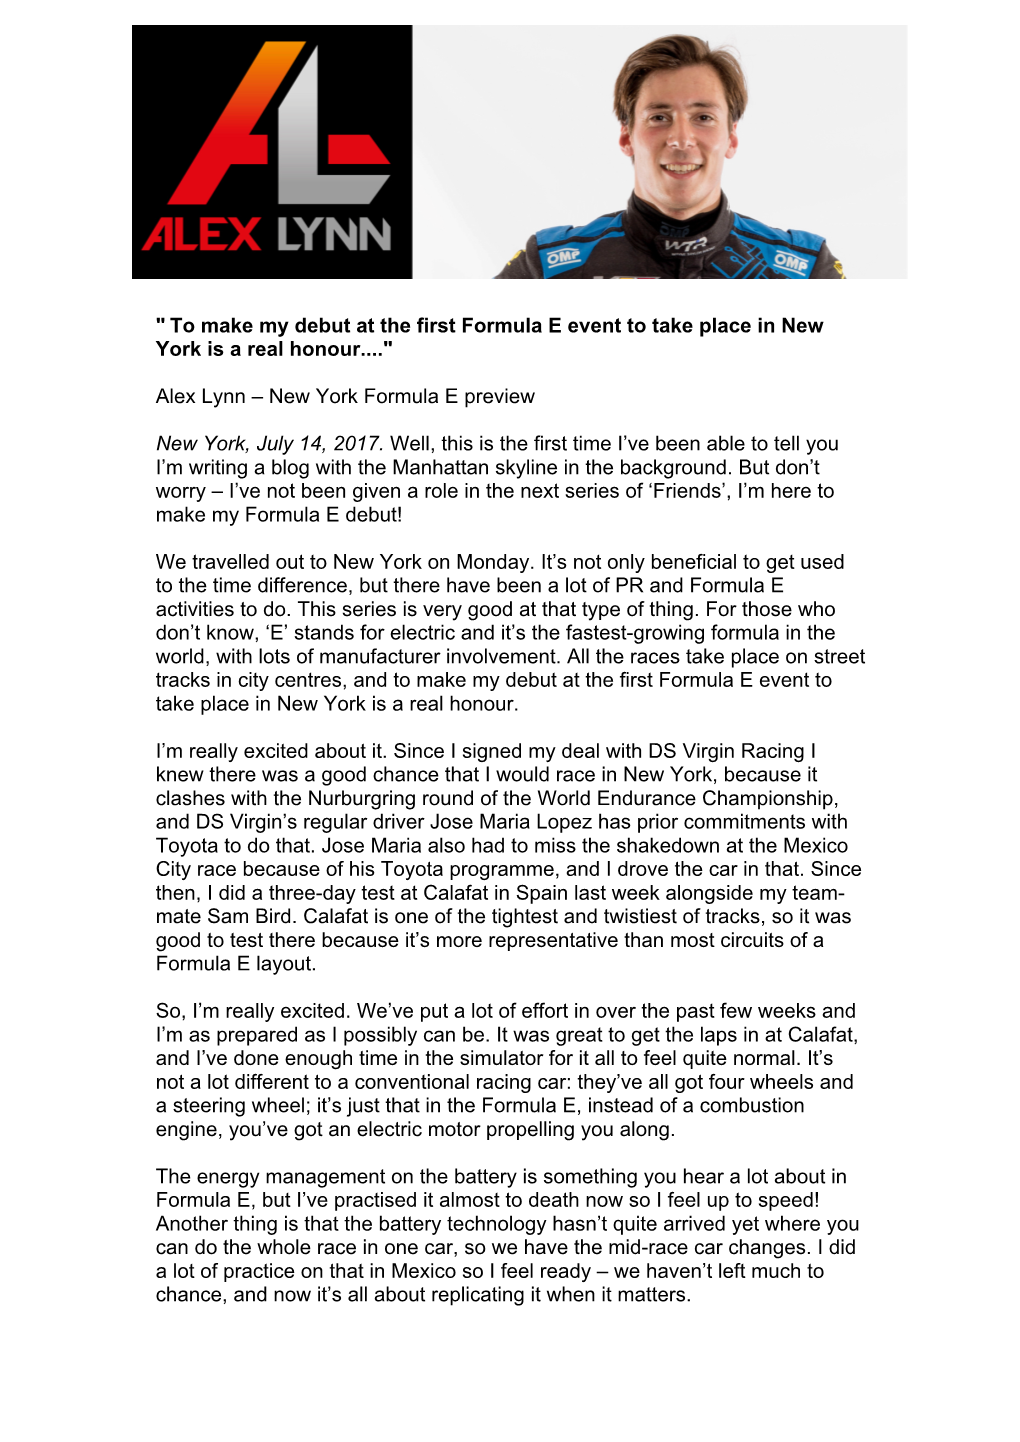 " to Make My Debut at the First Formula E Event to Take Place in New York Is a Real Honour...."